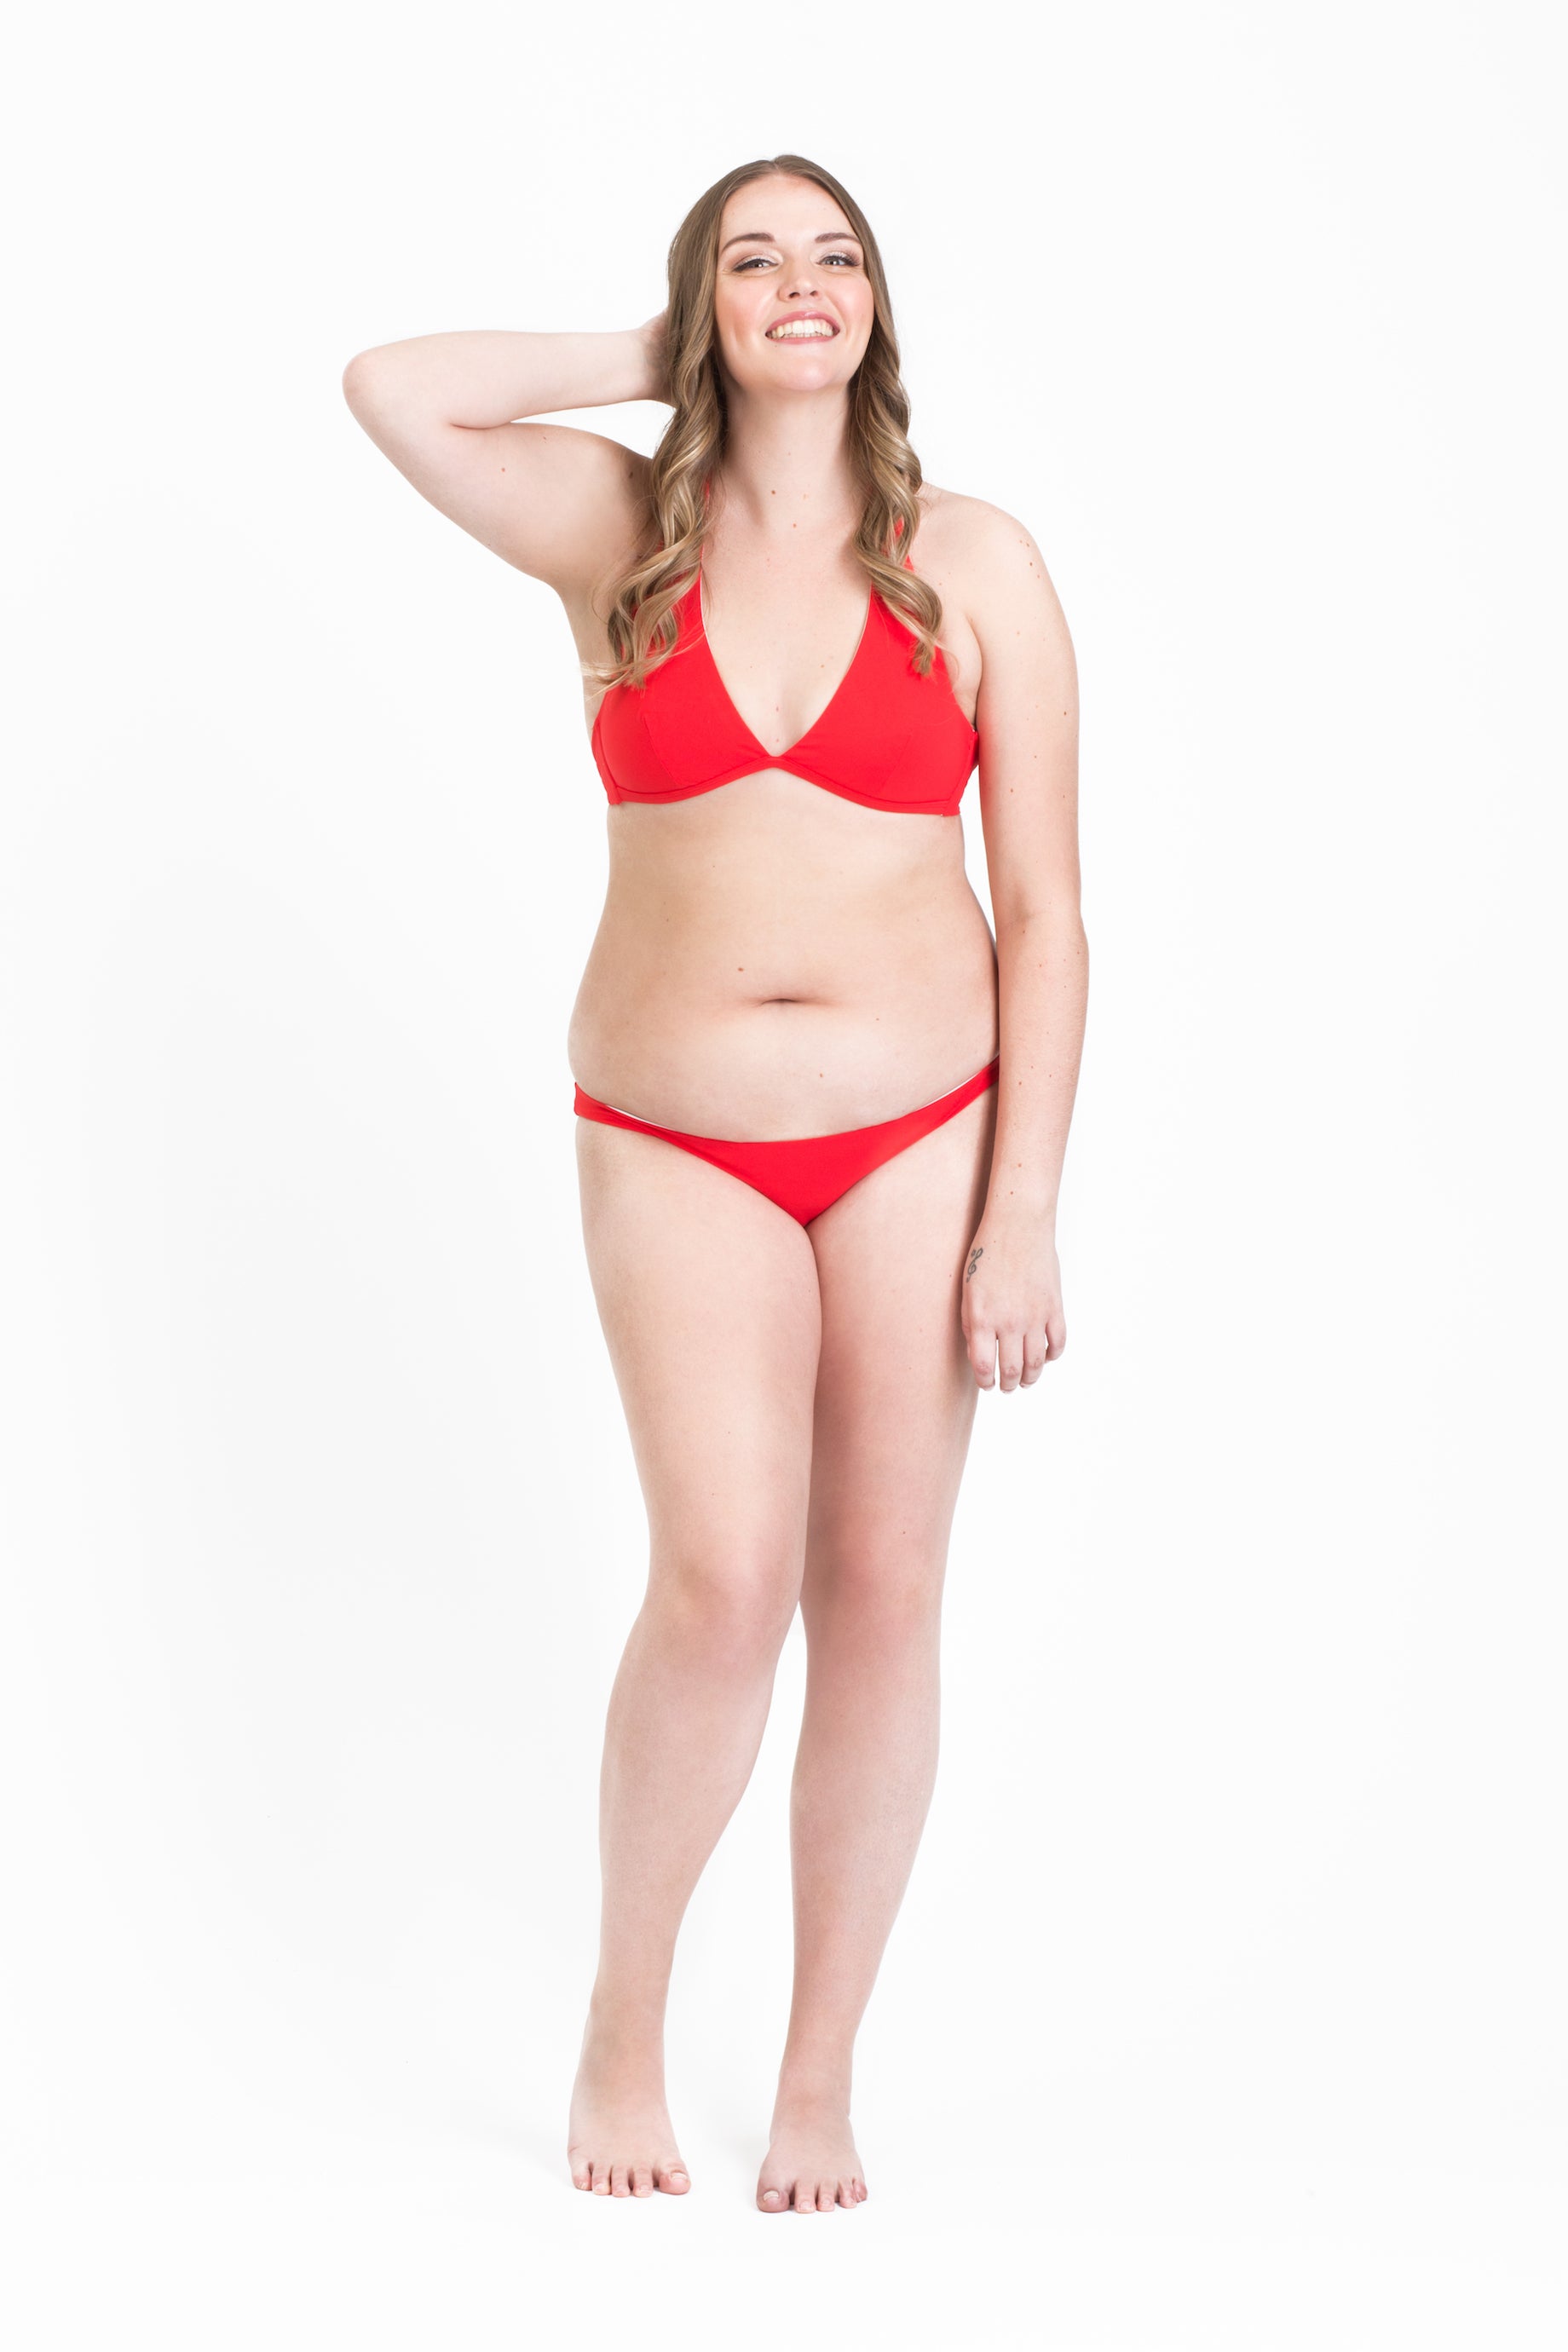 Coral red ISKKA Gabrielle Halter with low rise bottoms. Strike a pose!